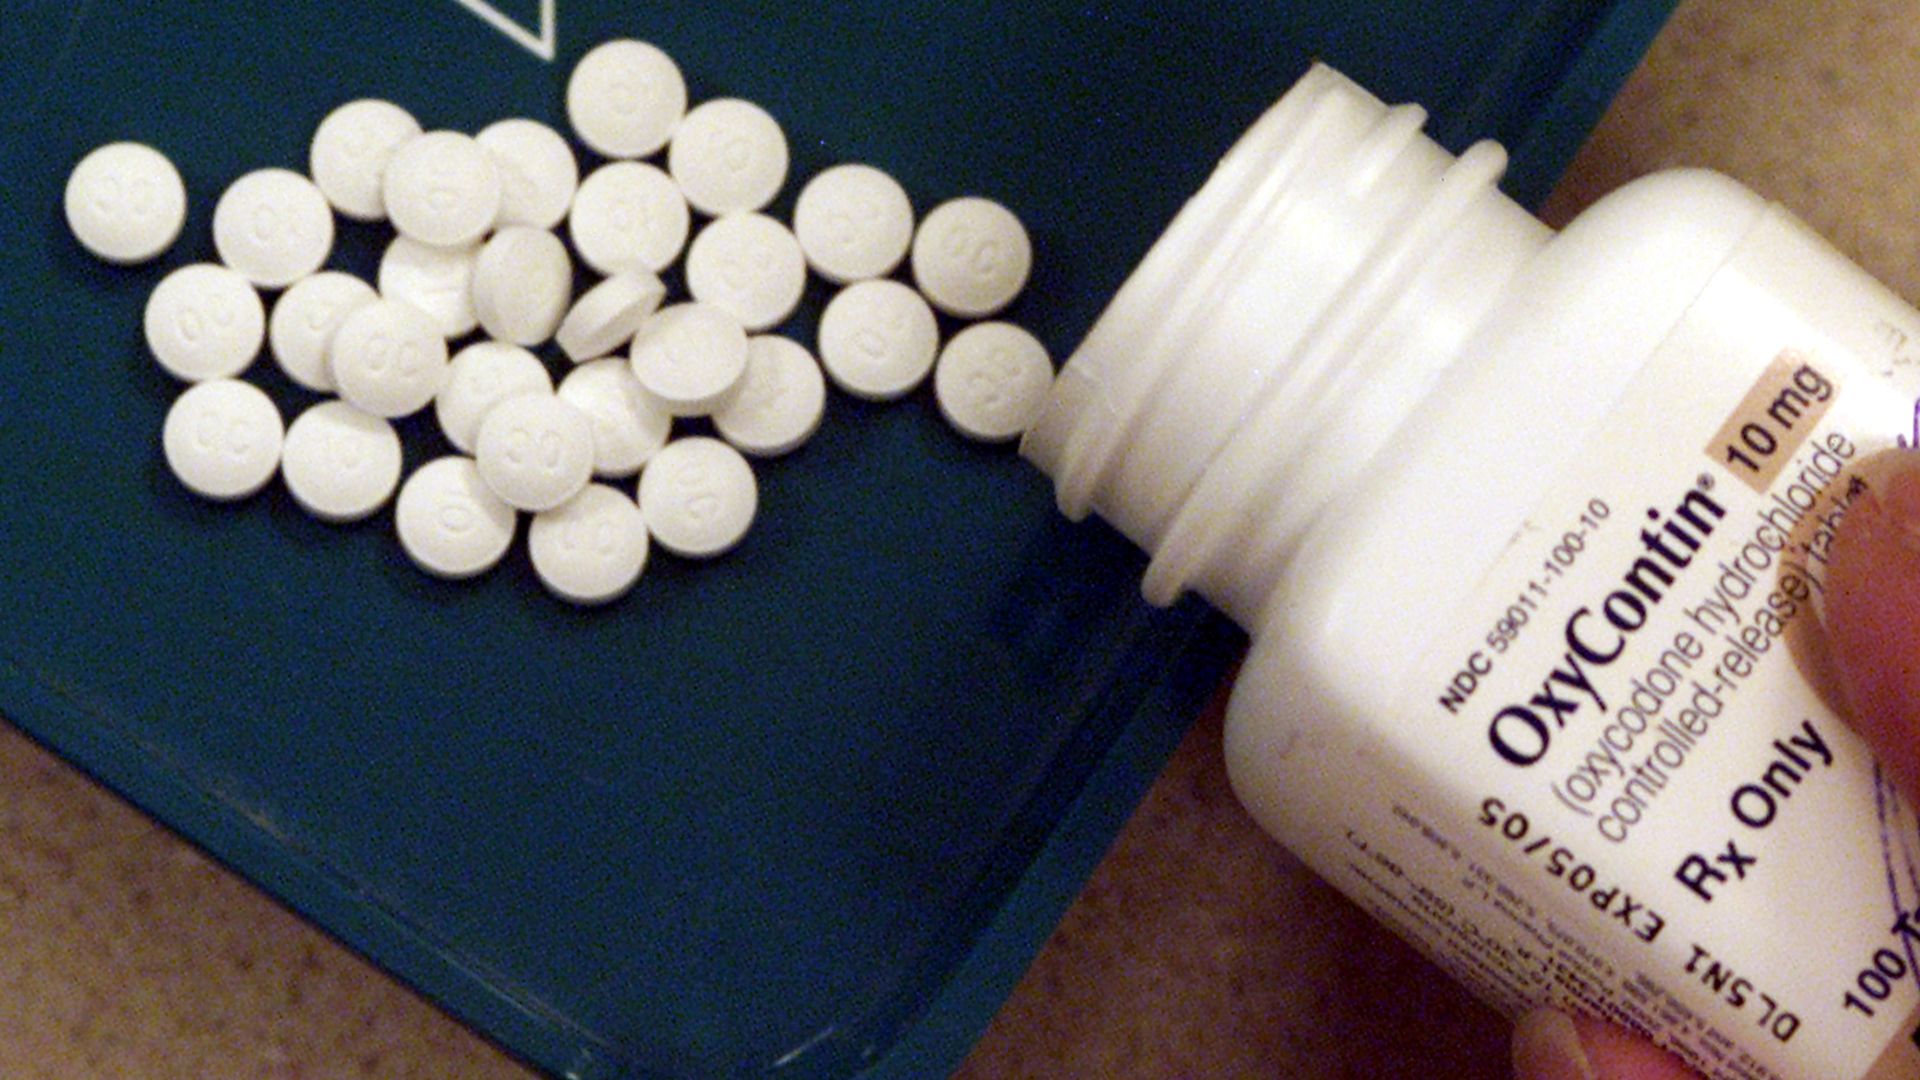 A bottle of OxyContin pills.